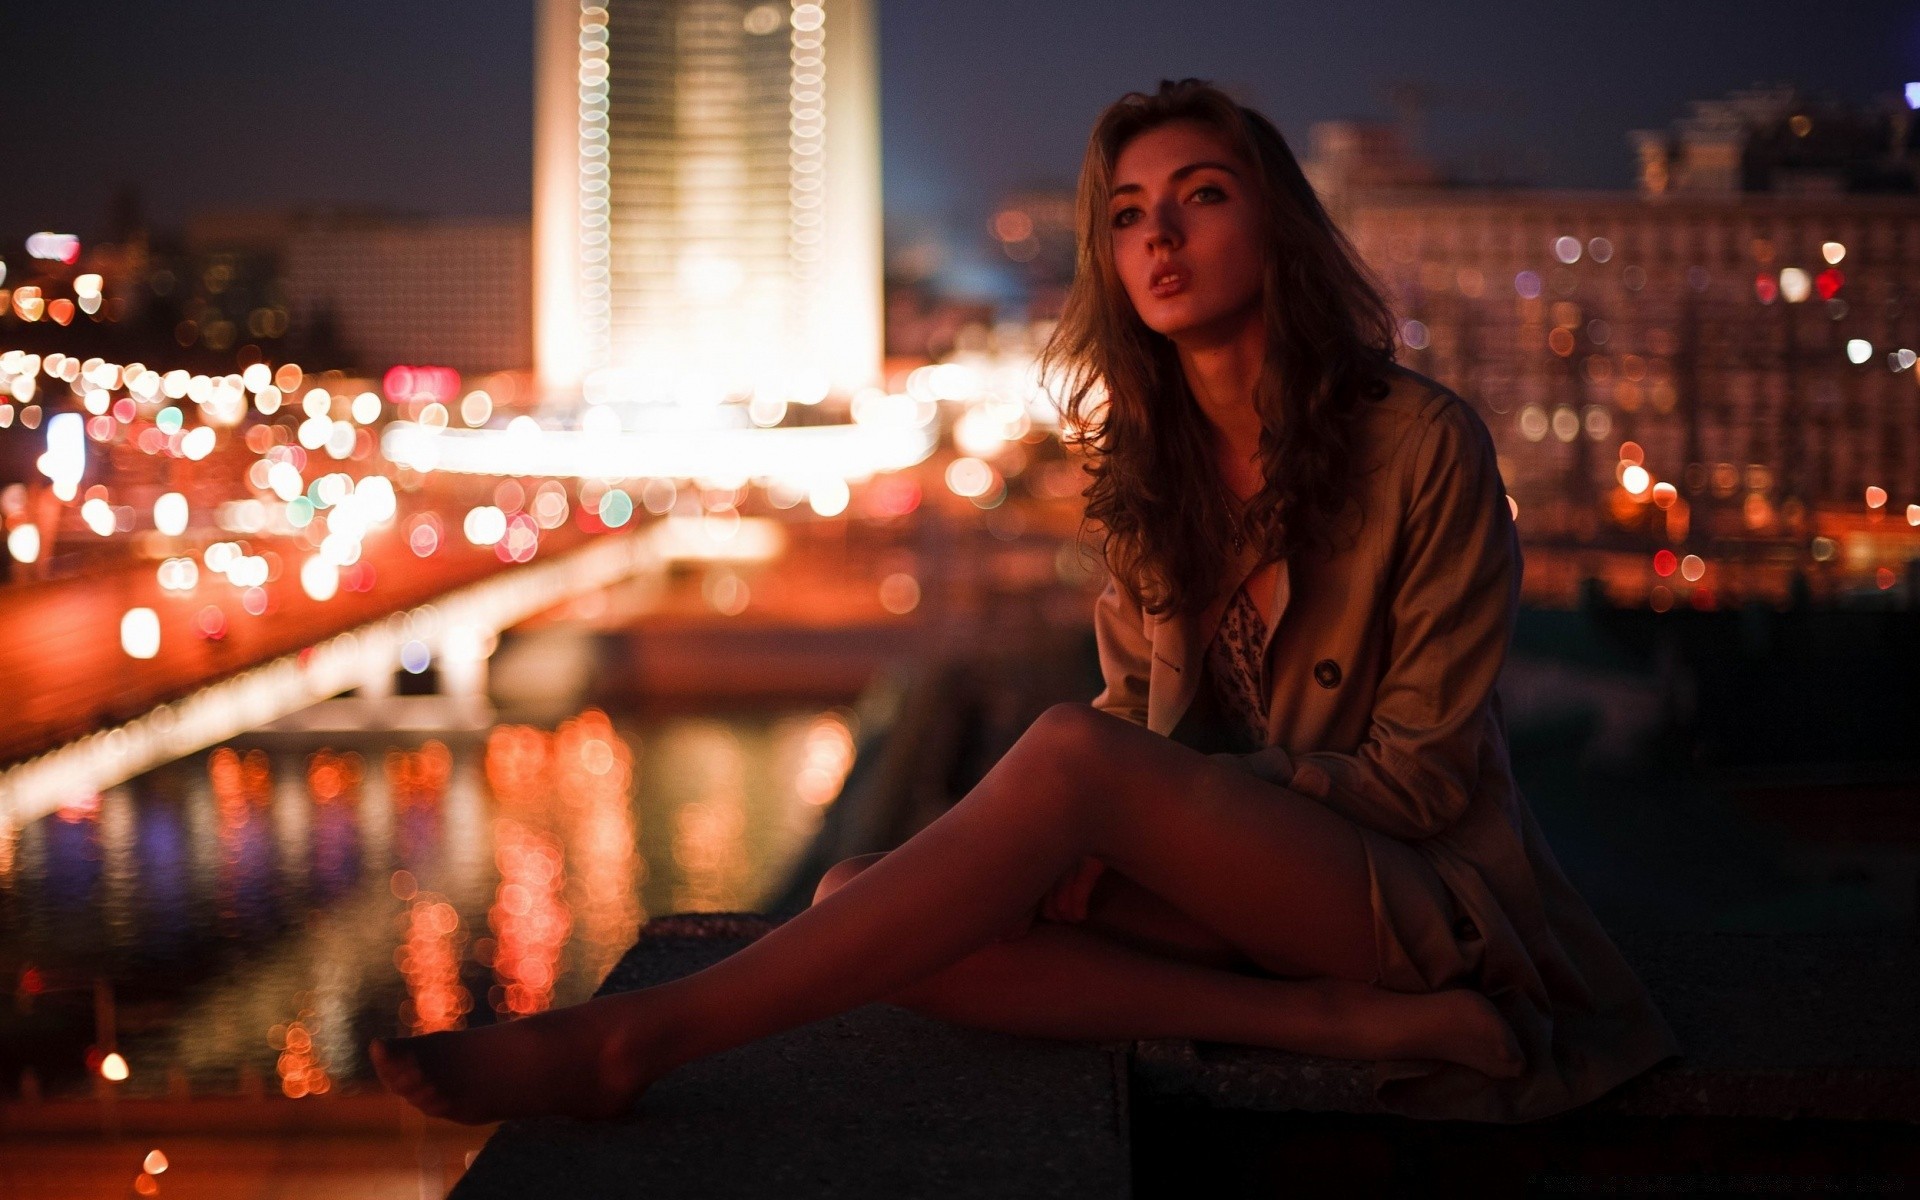 the other girls portrait adult woman one candle evening light girl city music travel street festival